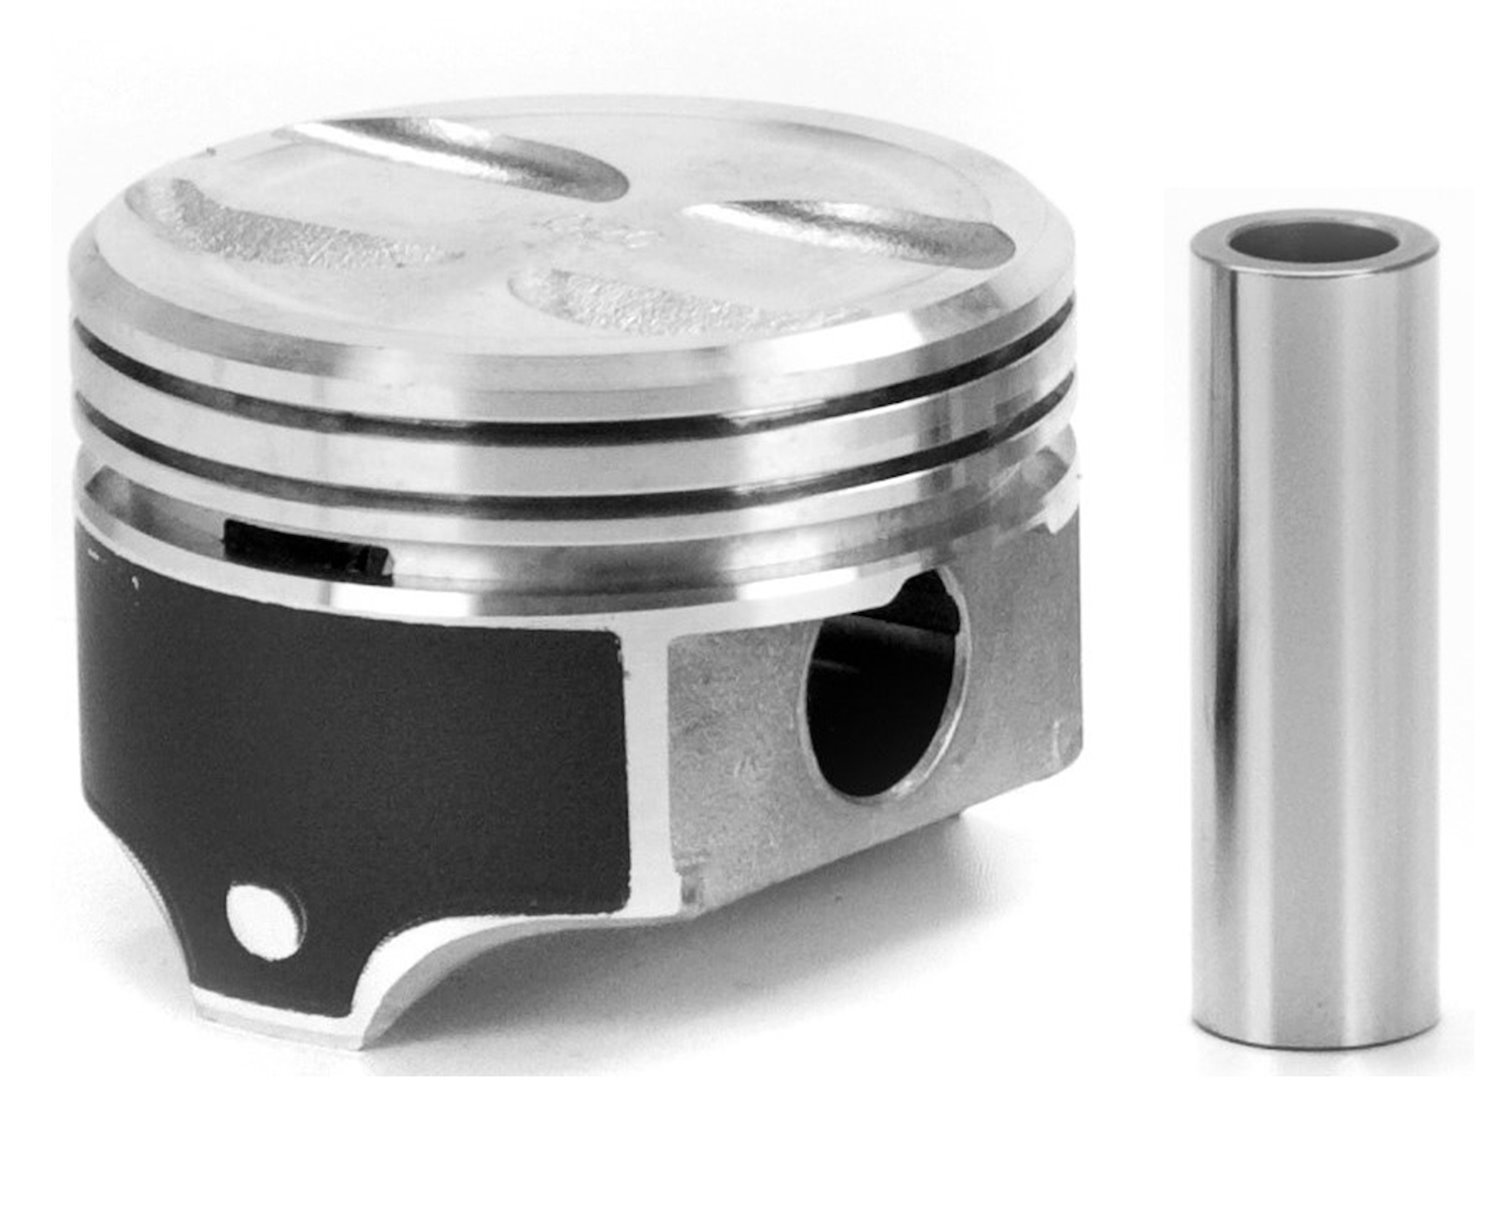 Silv-O-Lite Dish Piston Set w/Coated Skirts for Small Block Chevy 305 ci. (5.0L)